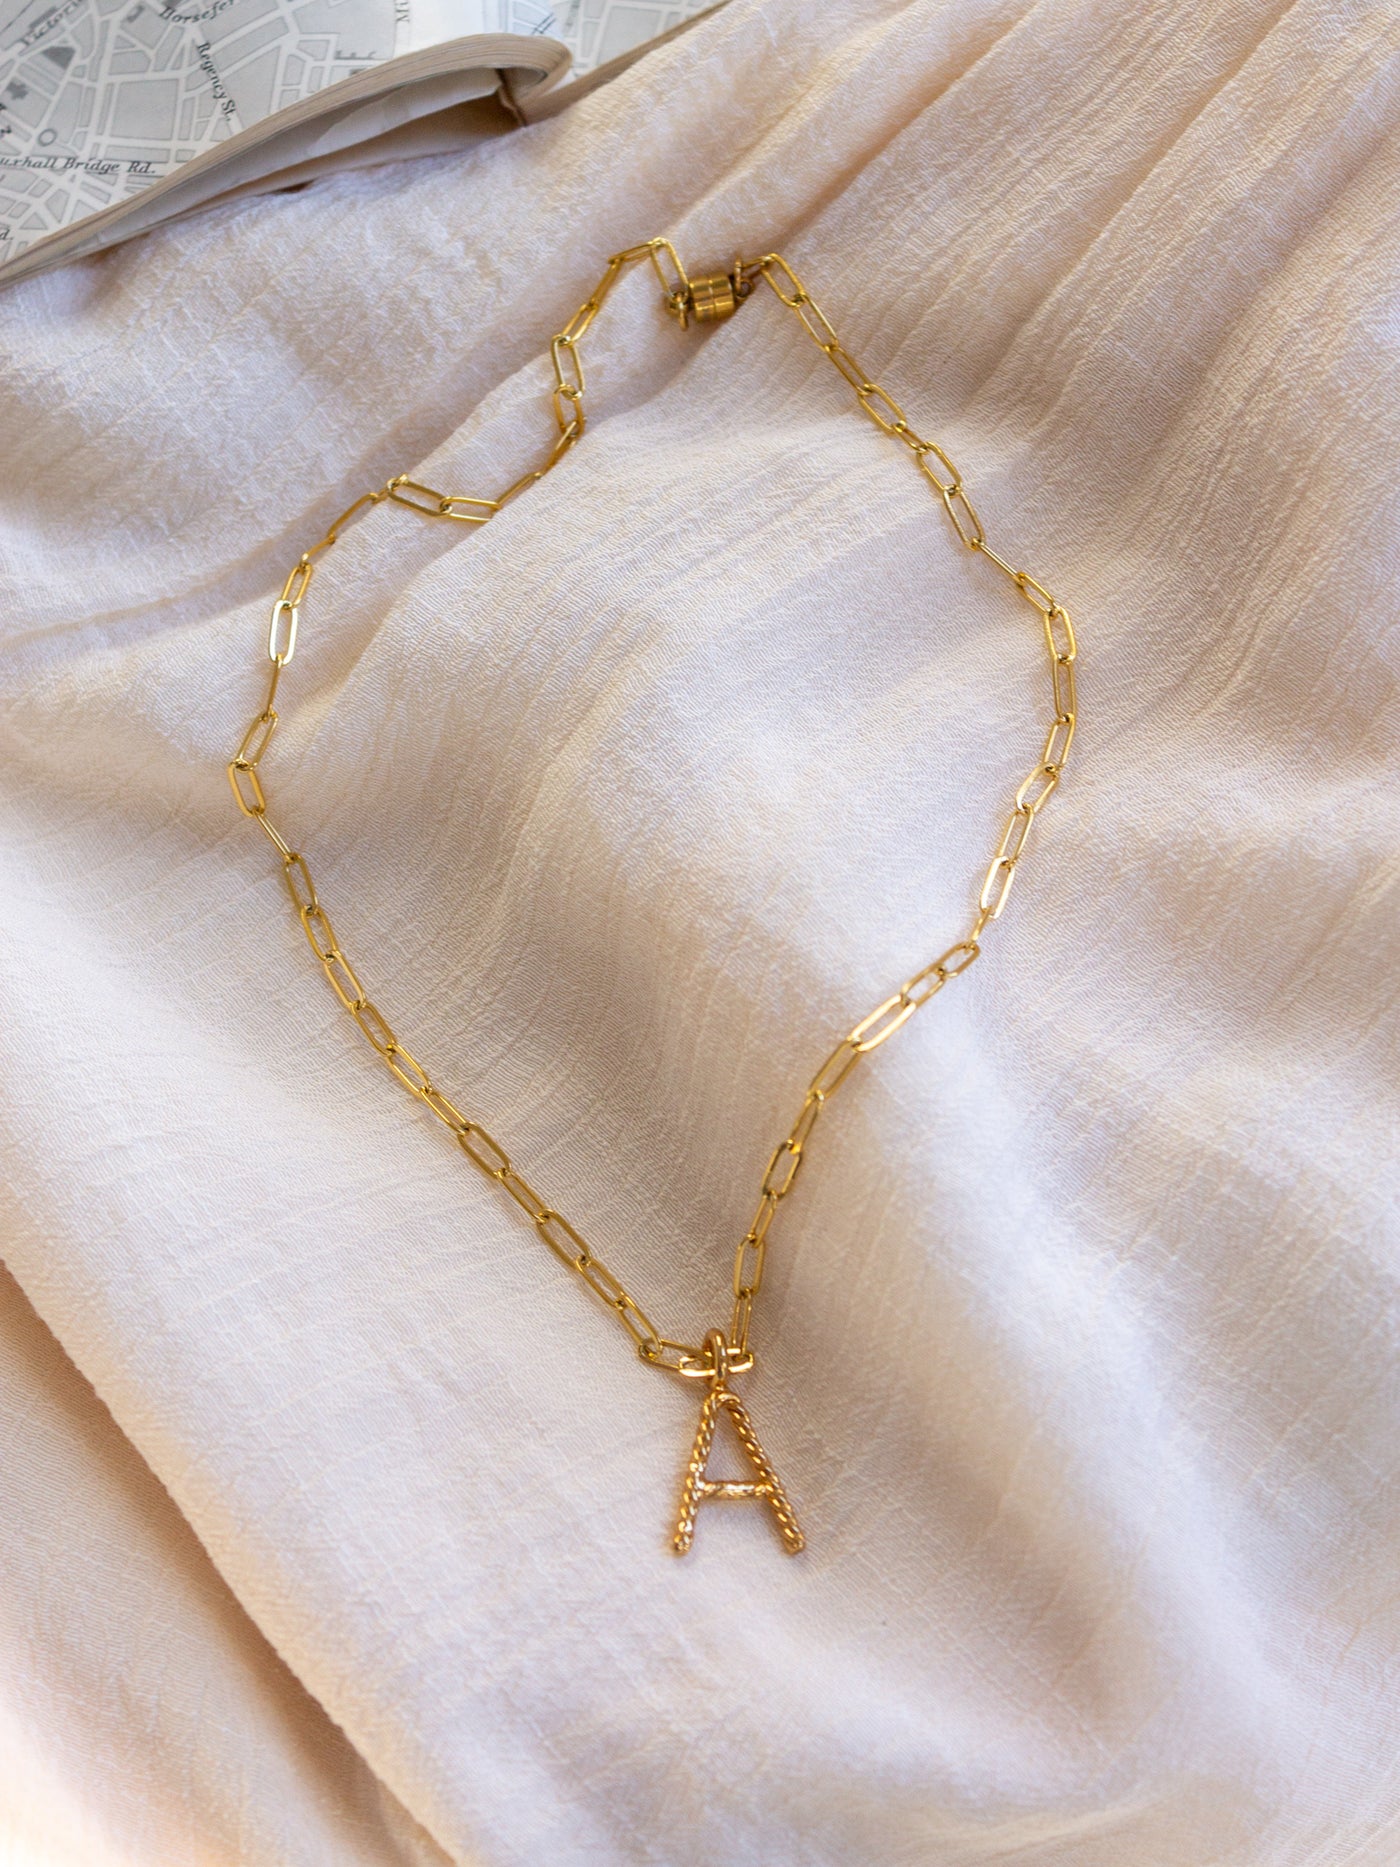 A square link/ paperclip style chain necklace with a twisted capital A attached to it.